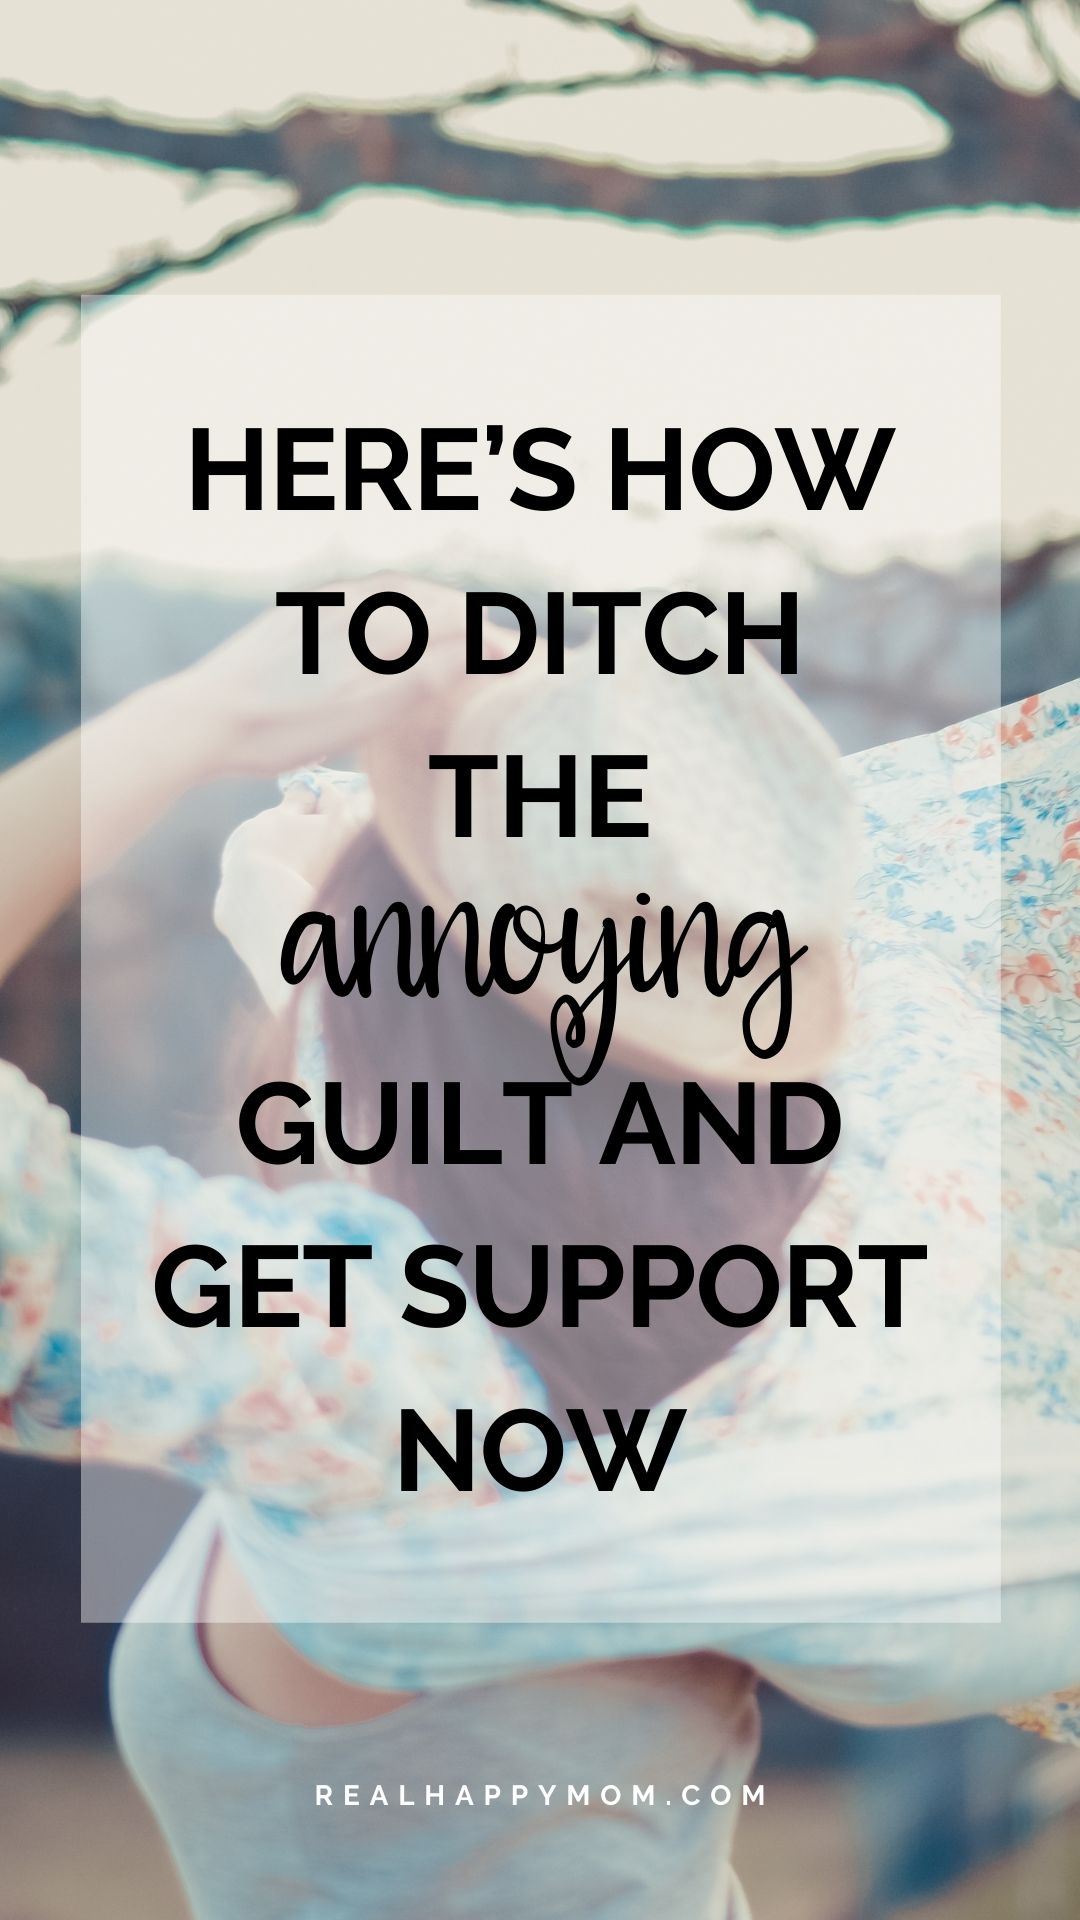 Here’s How to Ditch the Annoying Guilt and Get Support Now